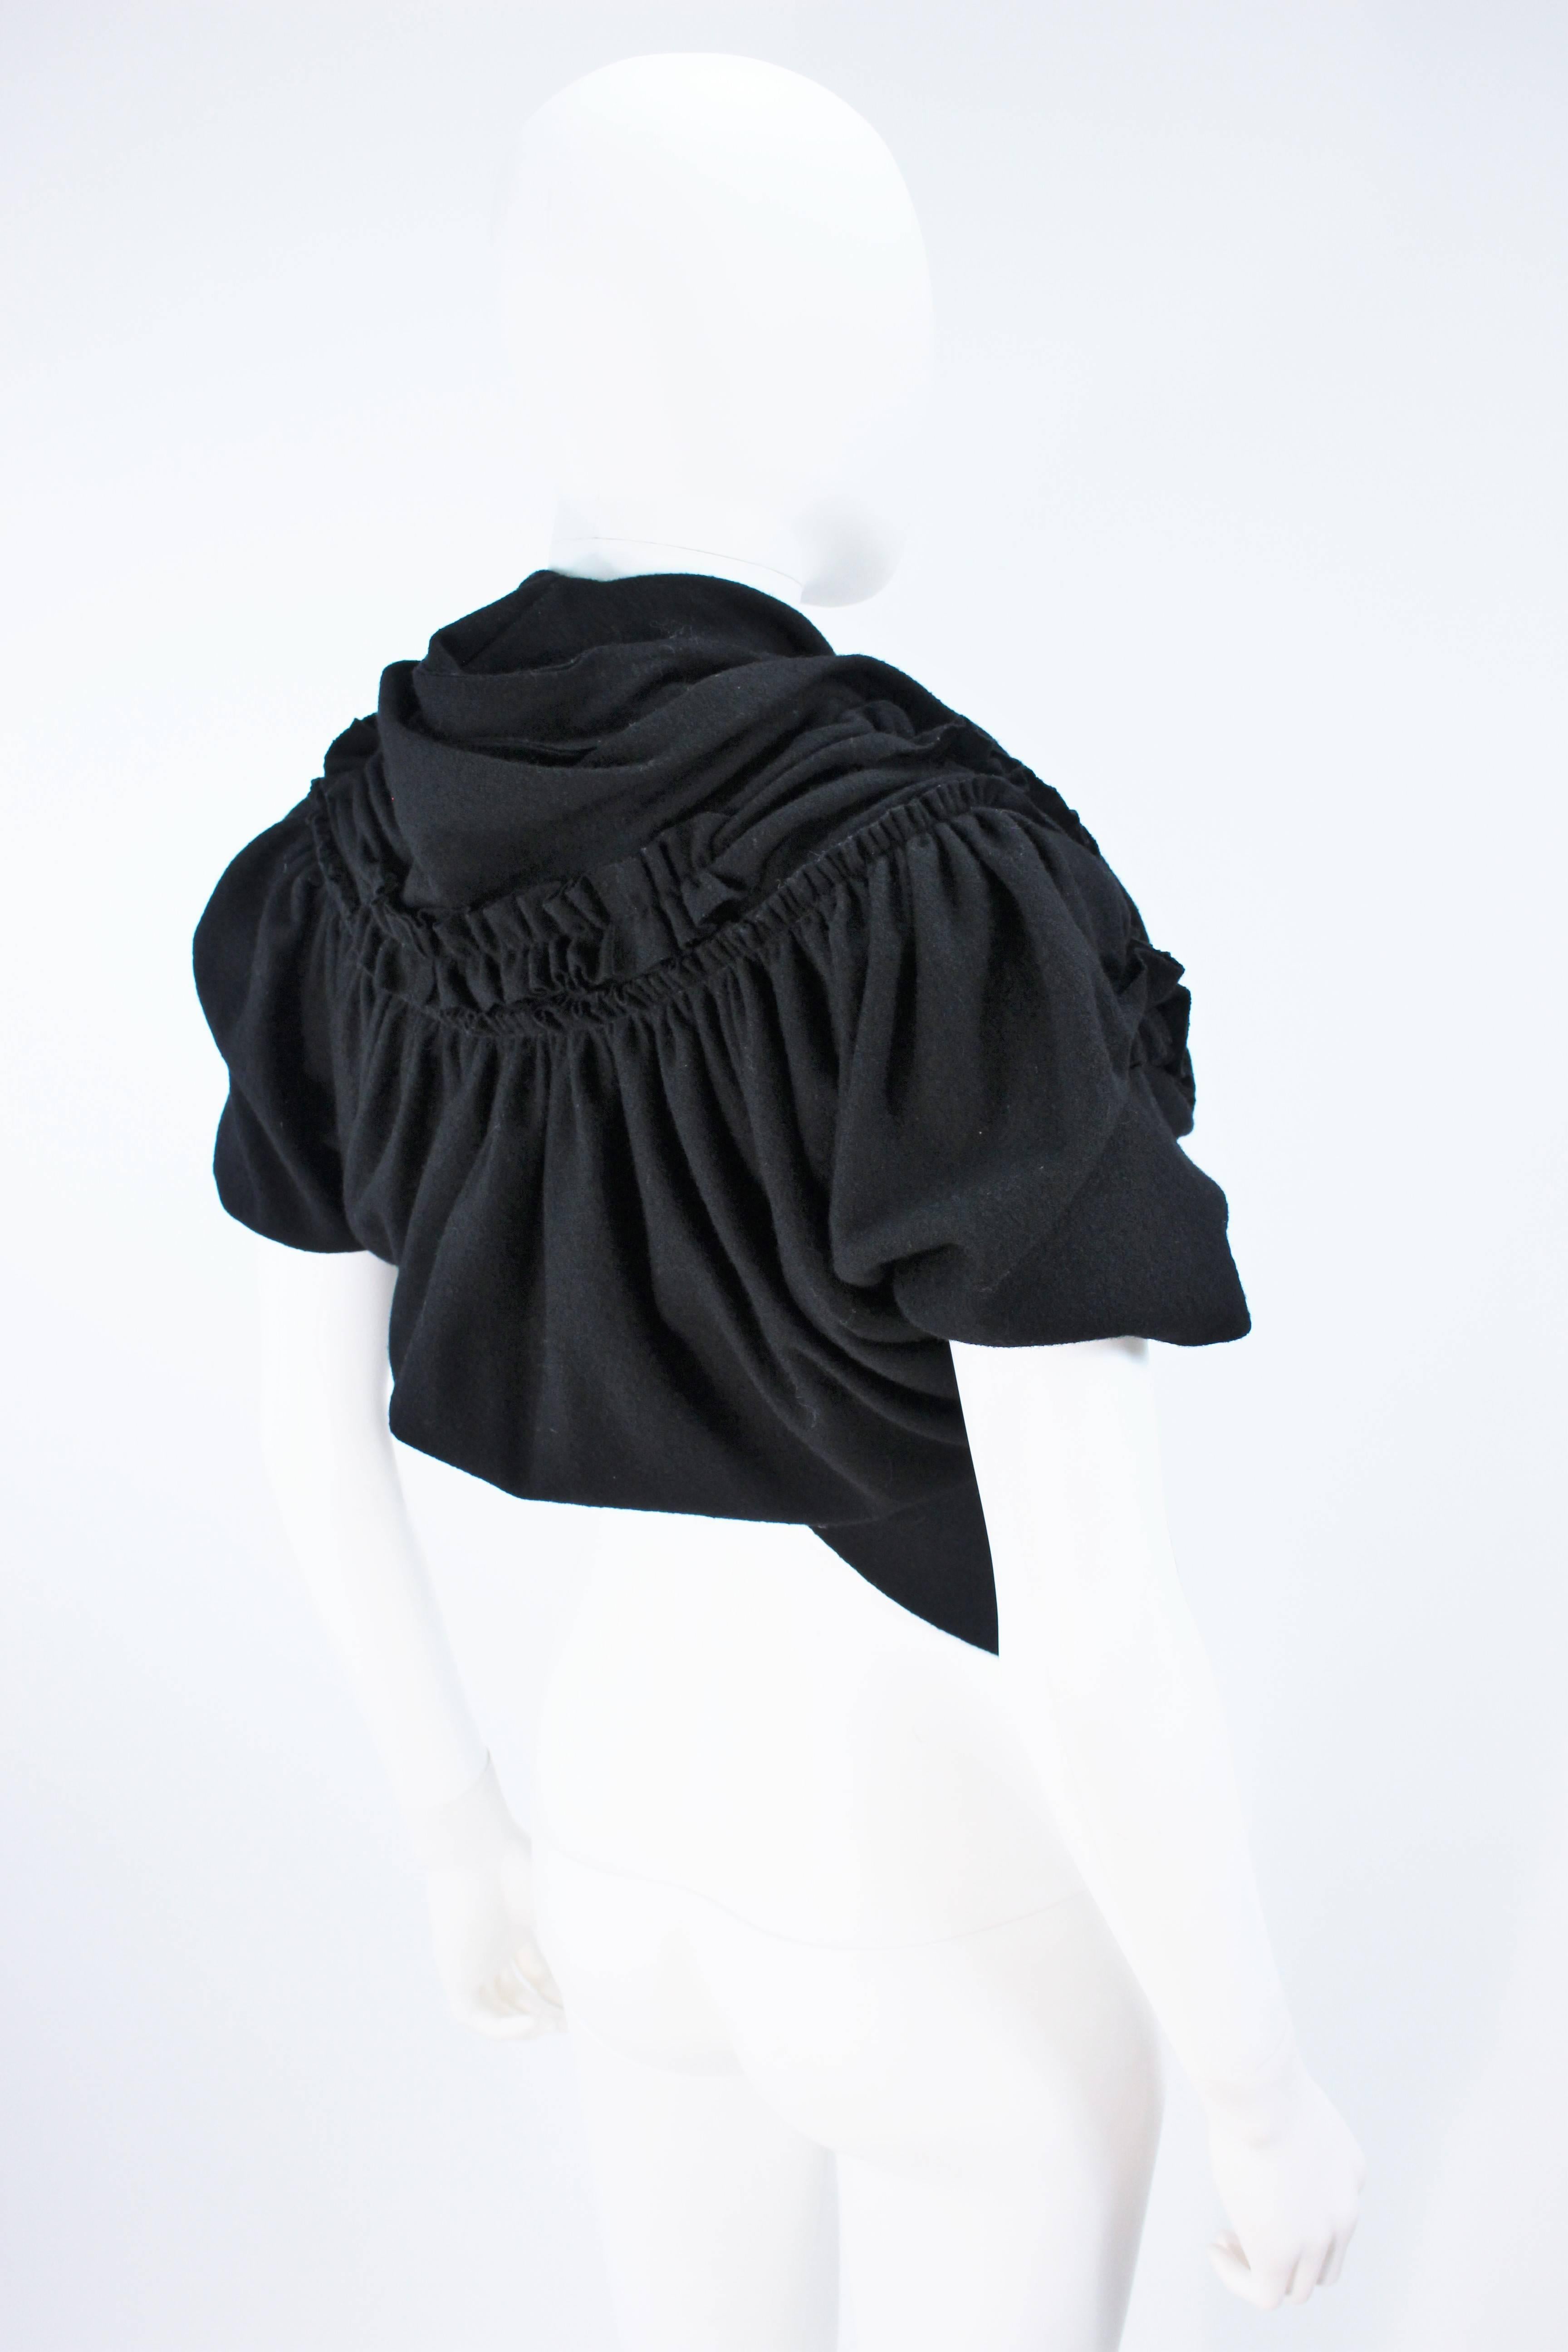 COMME DES GARCONS Draped Gathered Black Boiled Wool Blouse Size S 1